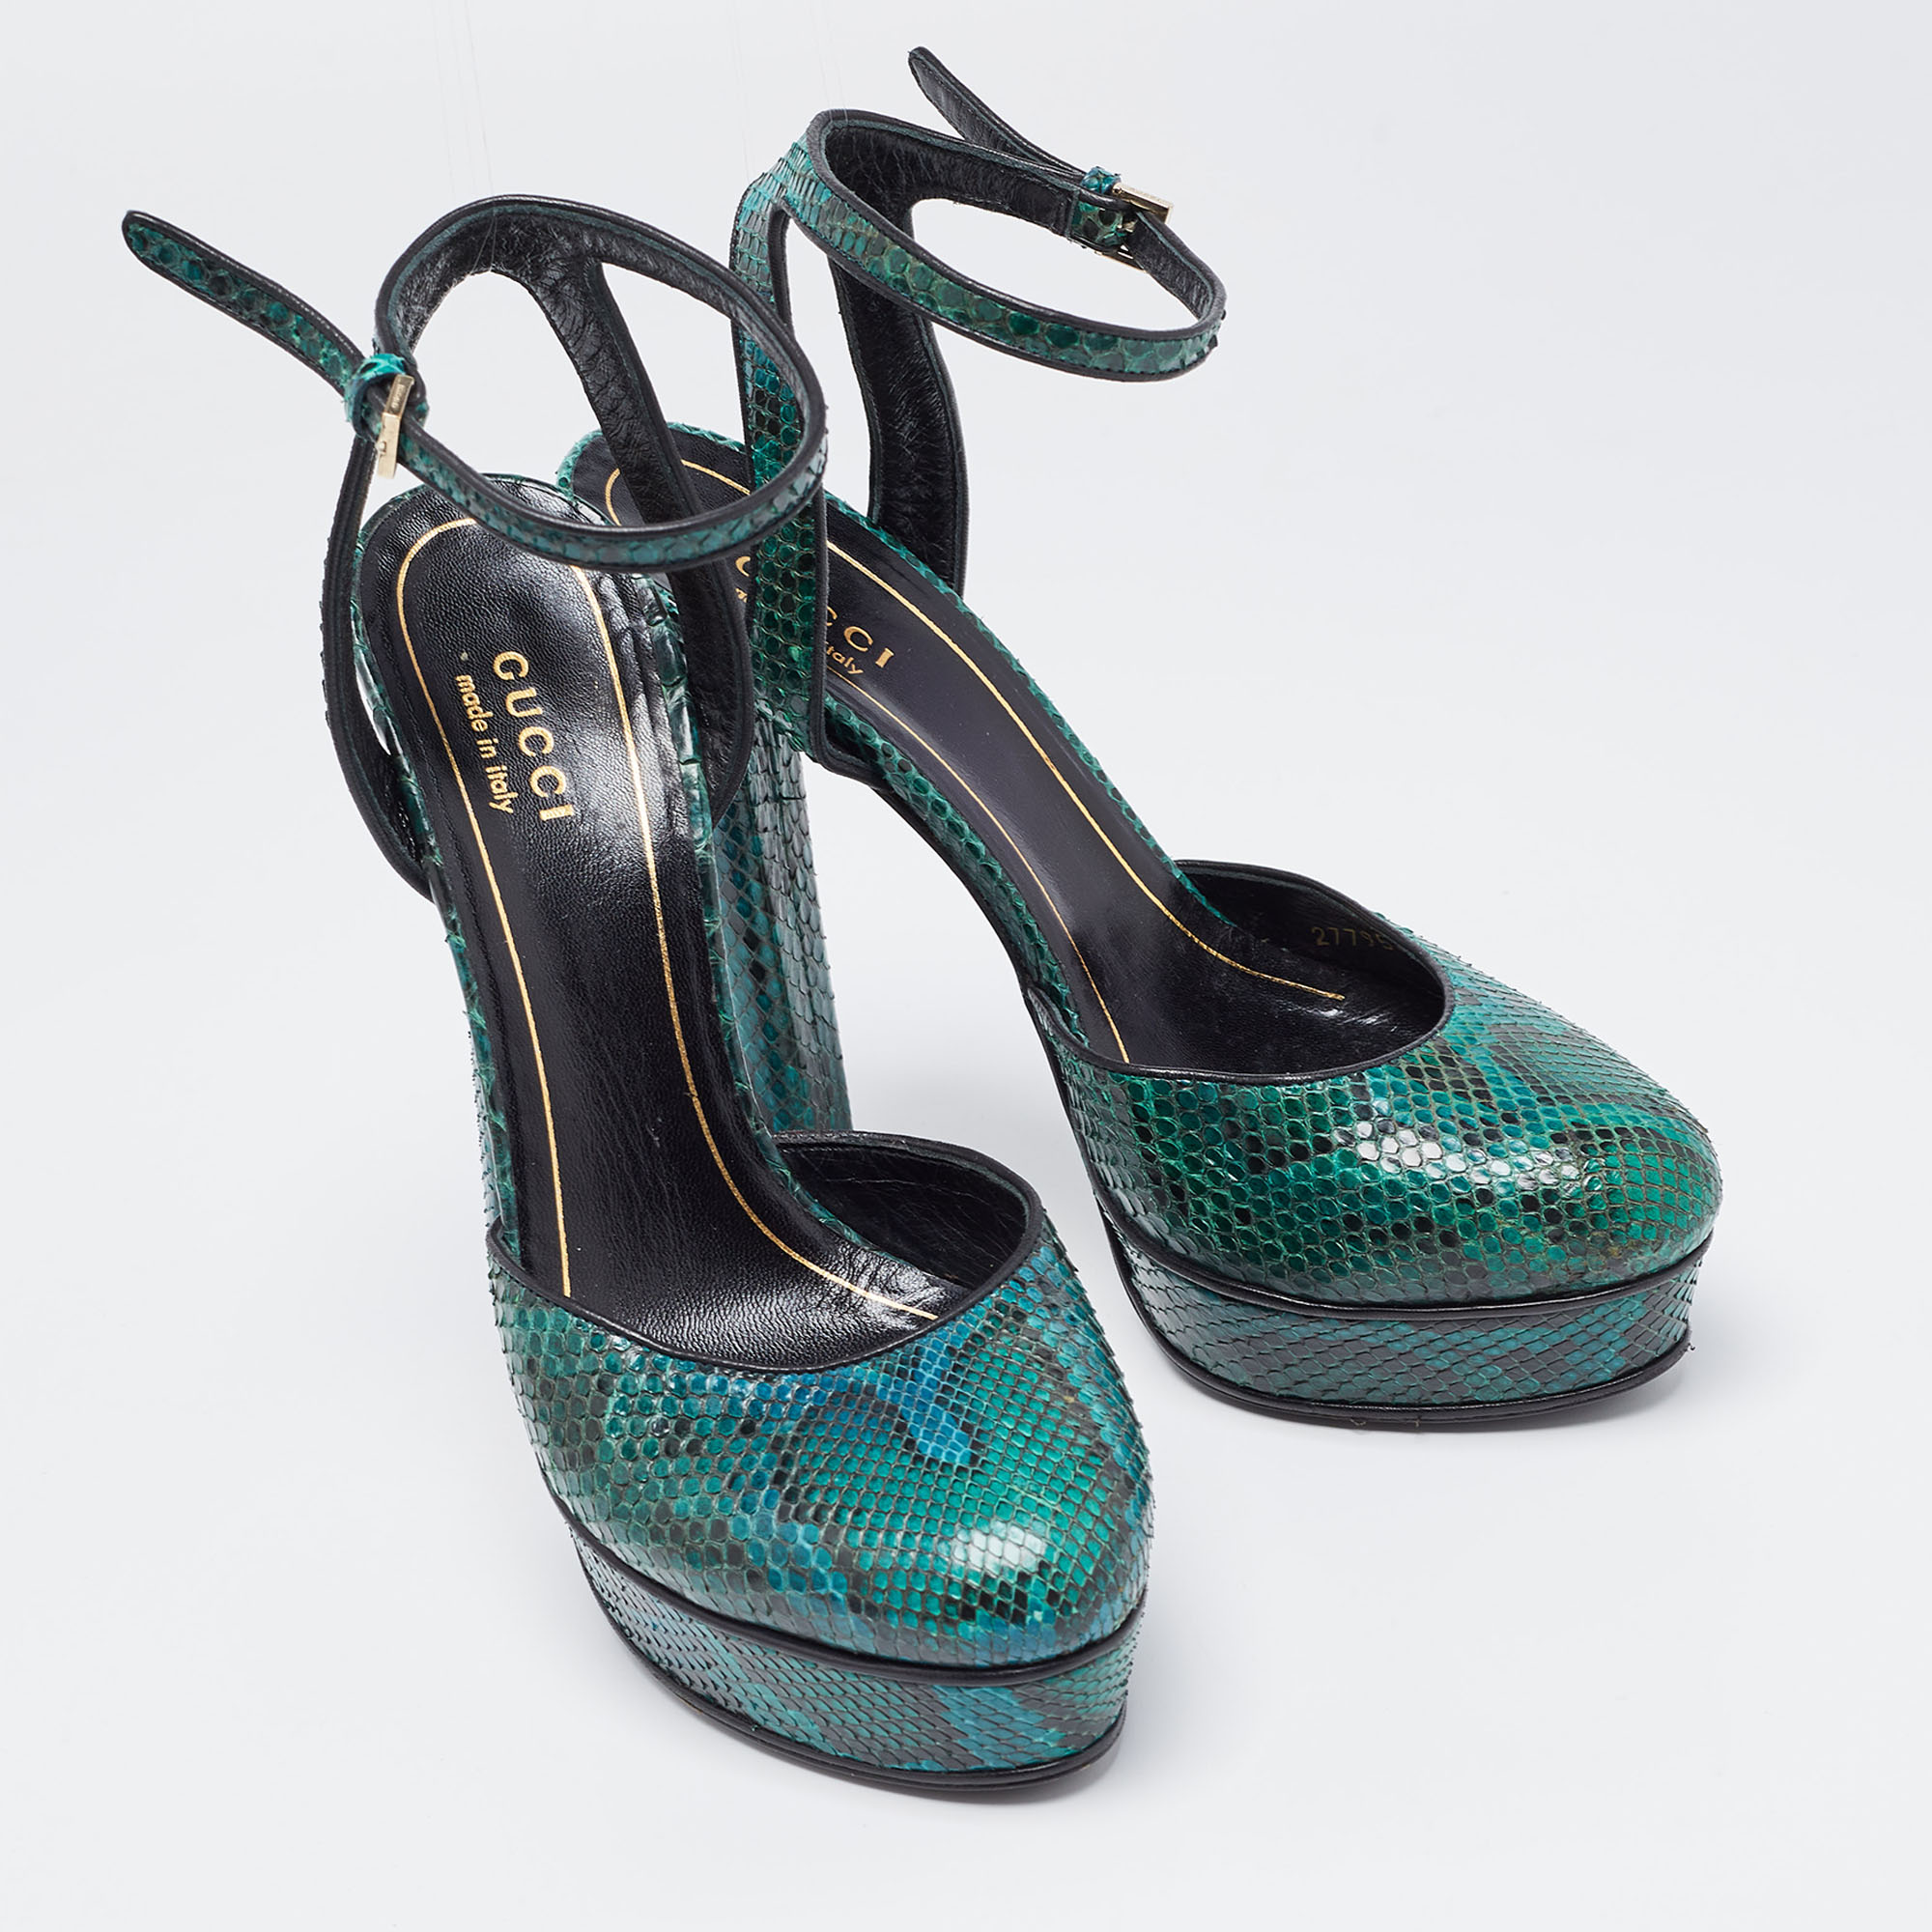 Gucci Green Python Leather Huston Pumps Size 36.5